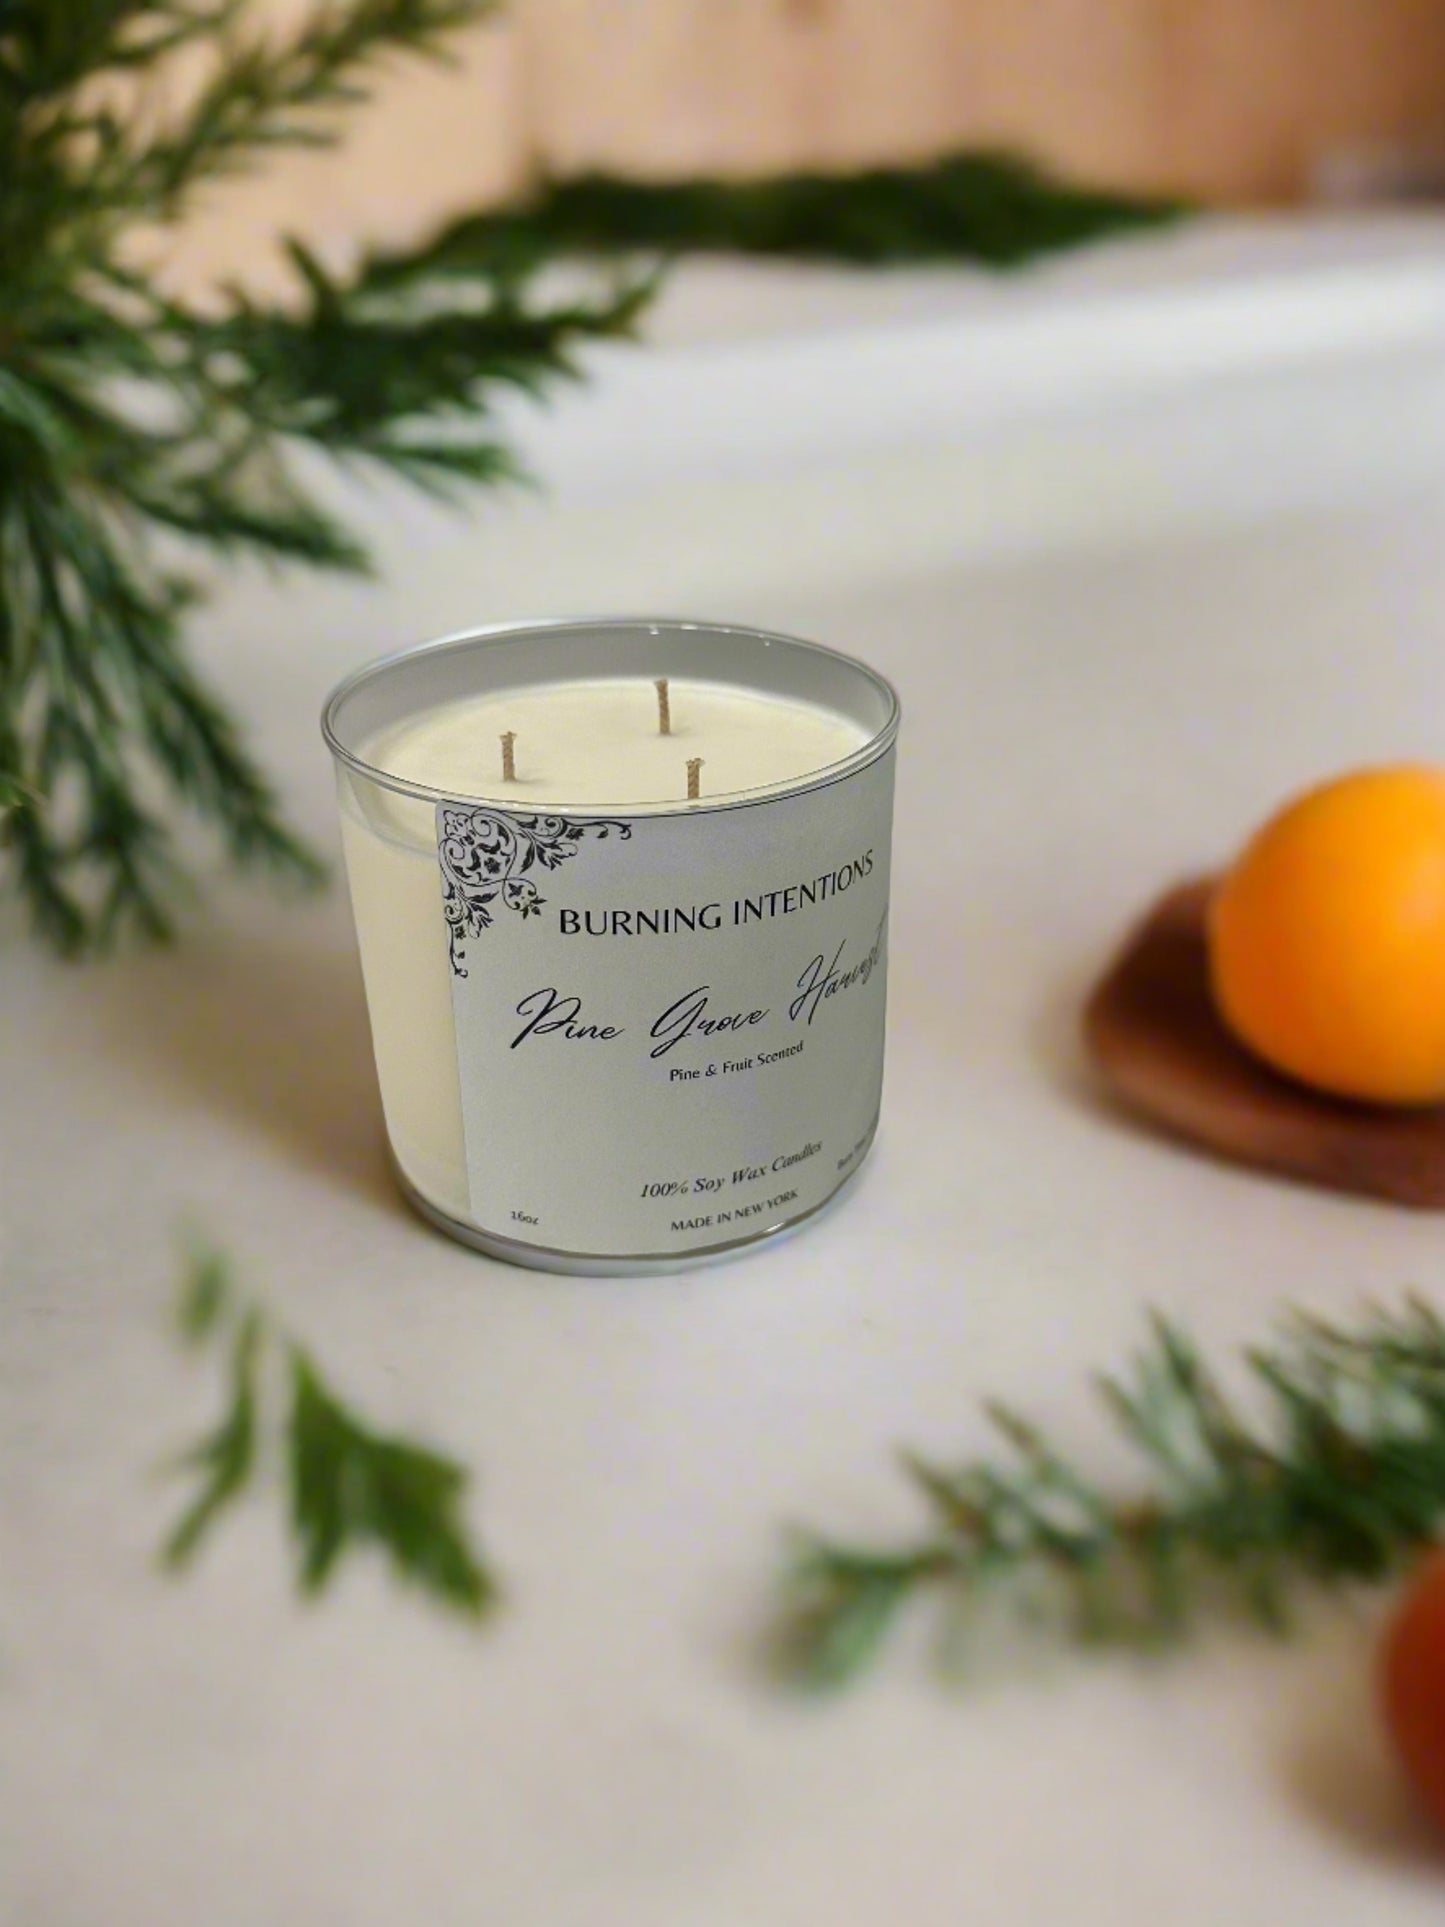 Pine Grove Harvest - Fruits & Tree Scented